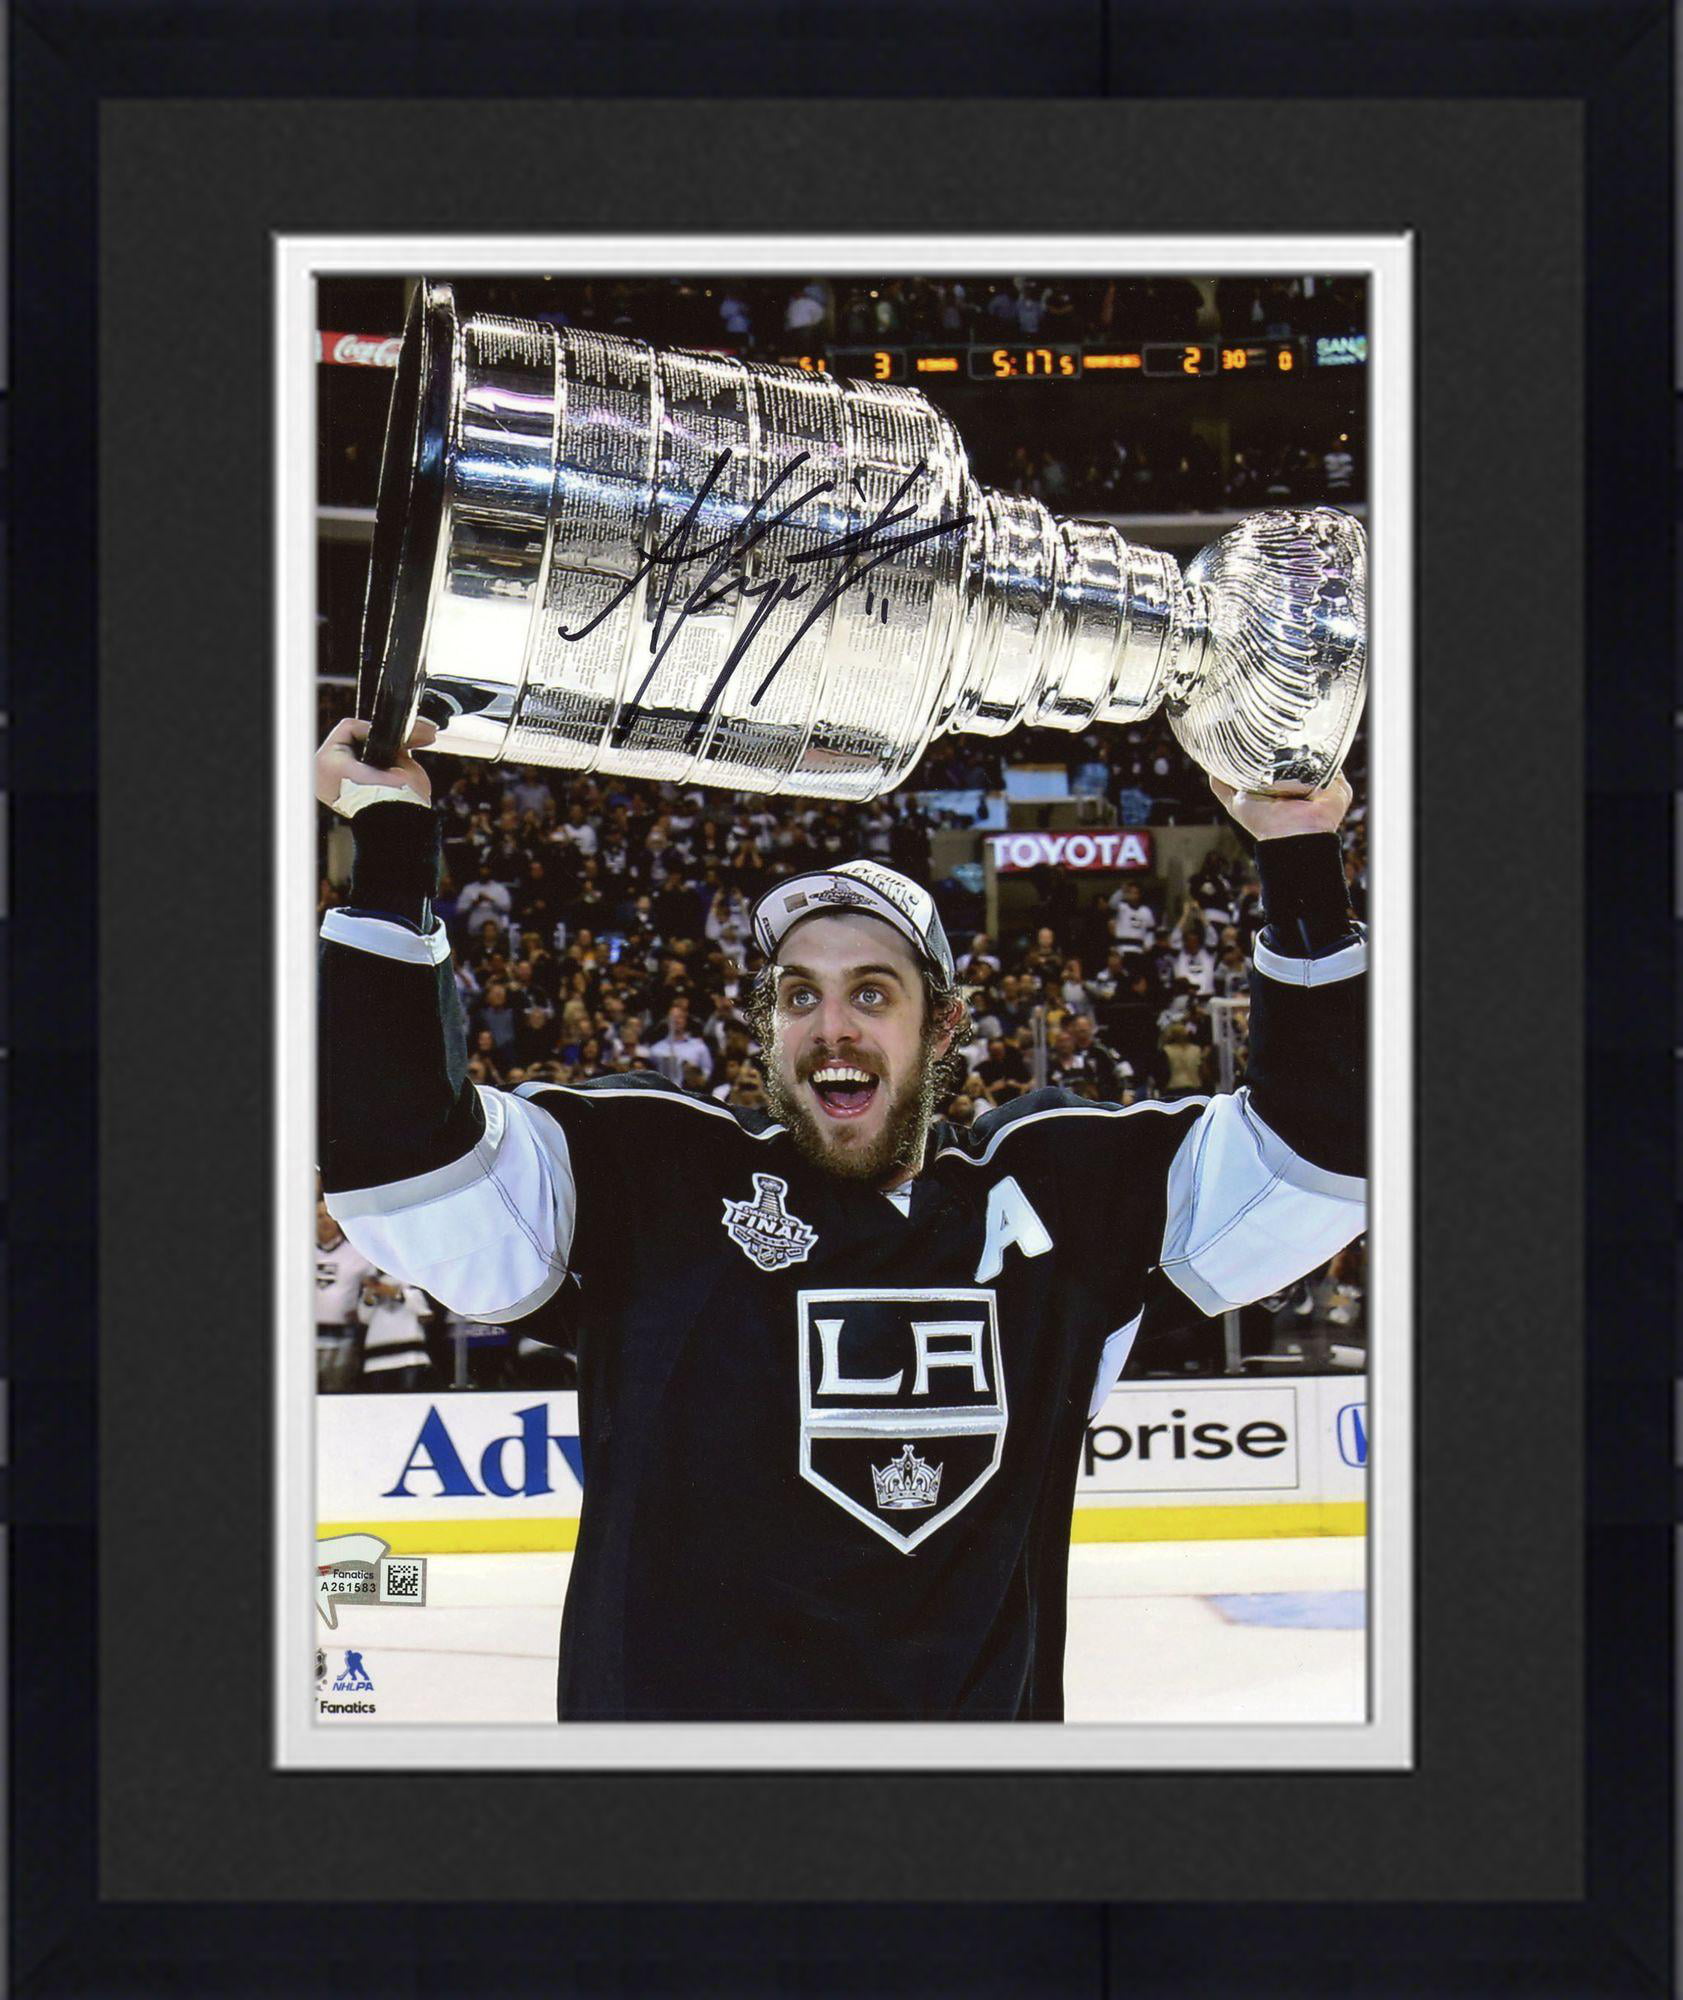 Louis Tampa Bay Lightning Autographed 8 x 10 Raising Cup Photograph Framed Martin St Fanatics Authentic Certified